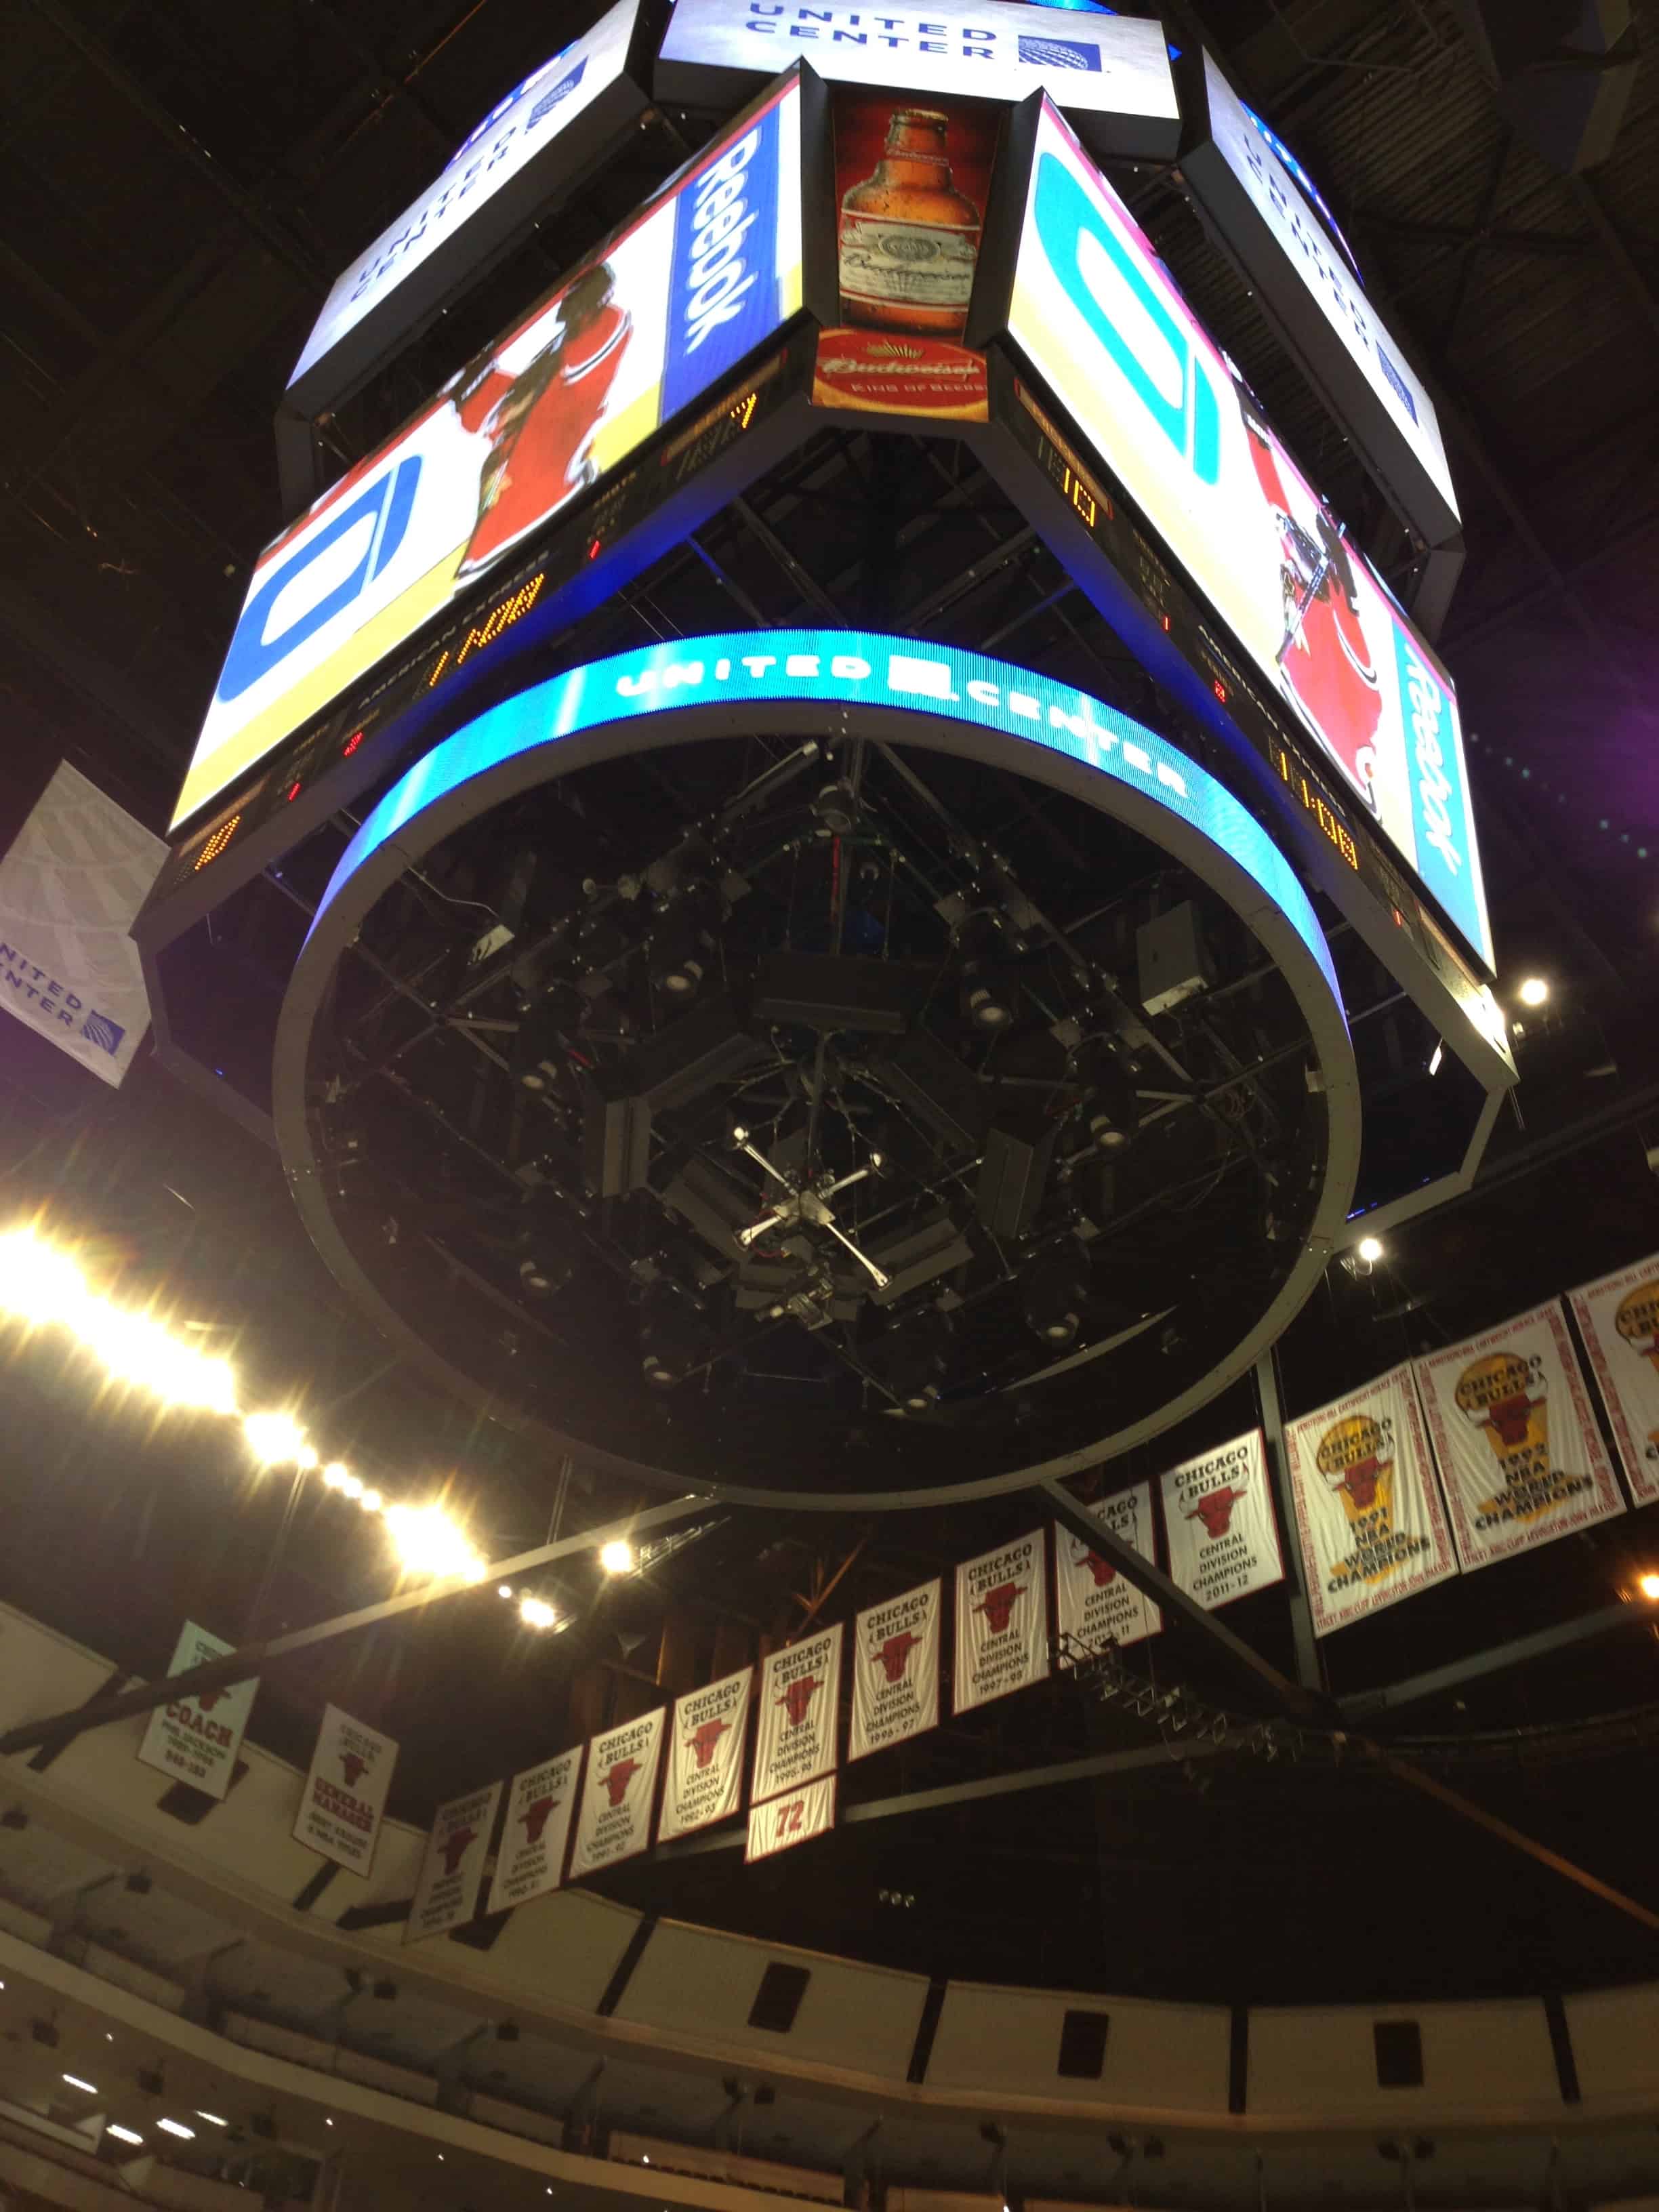 Ever wonder what it's like to stand under the scoreboard? at the United Center